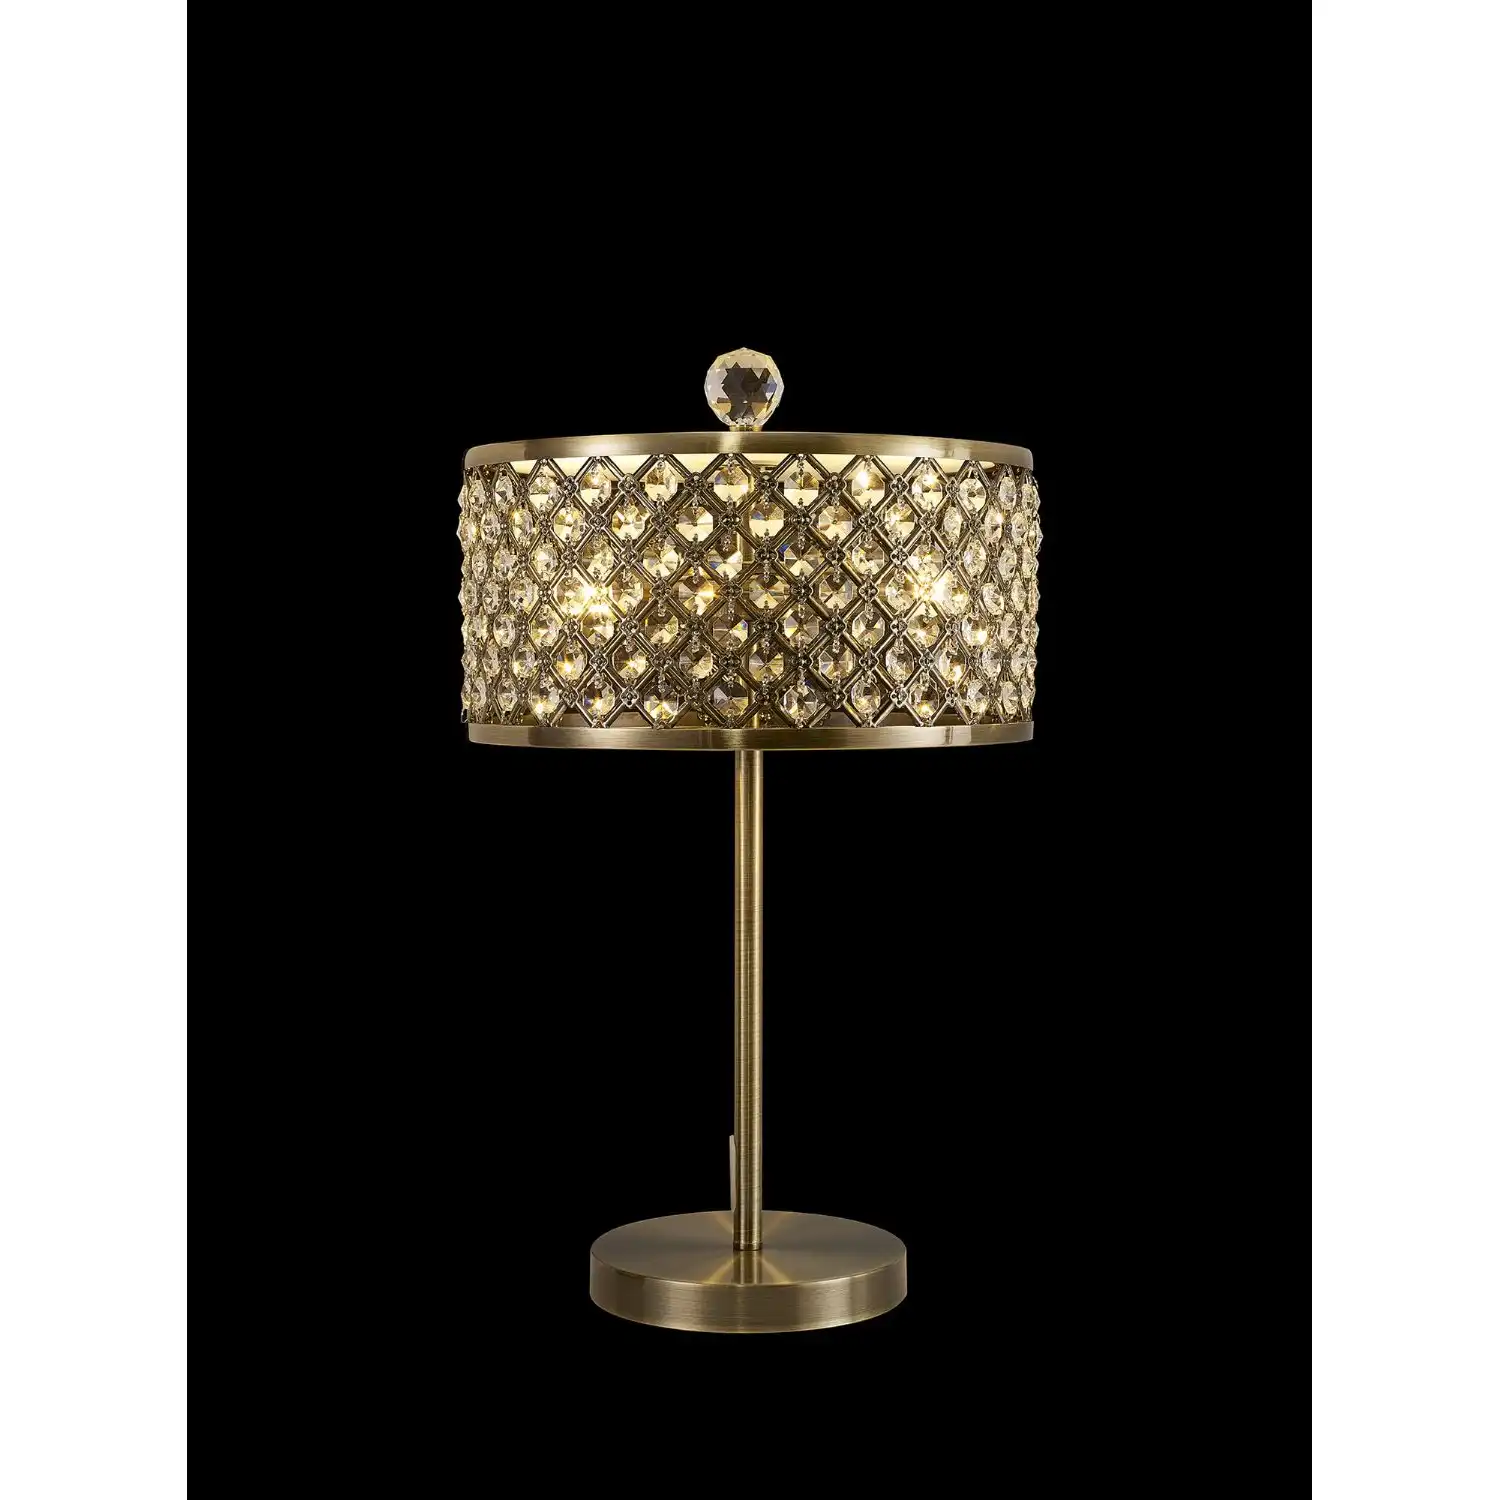 Sasha 2 Light E14, Table Lamp, Antique Brass With Crystal Glass And Opal Glass Diffuser